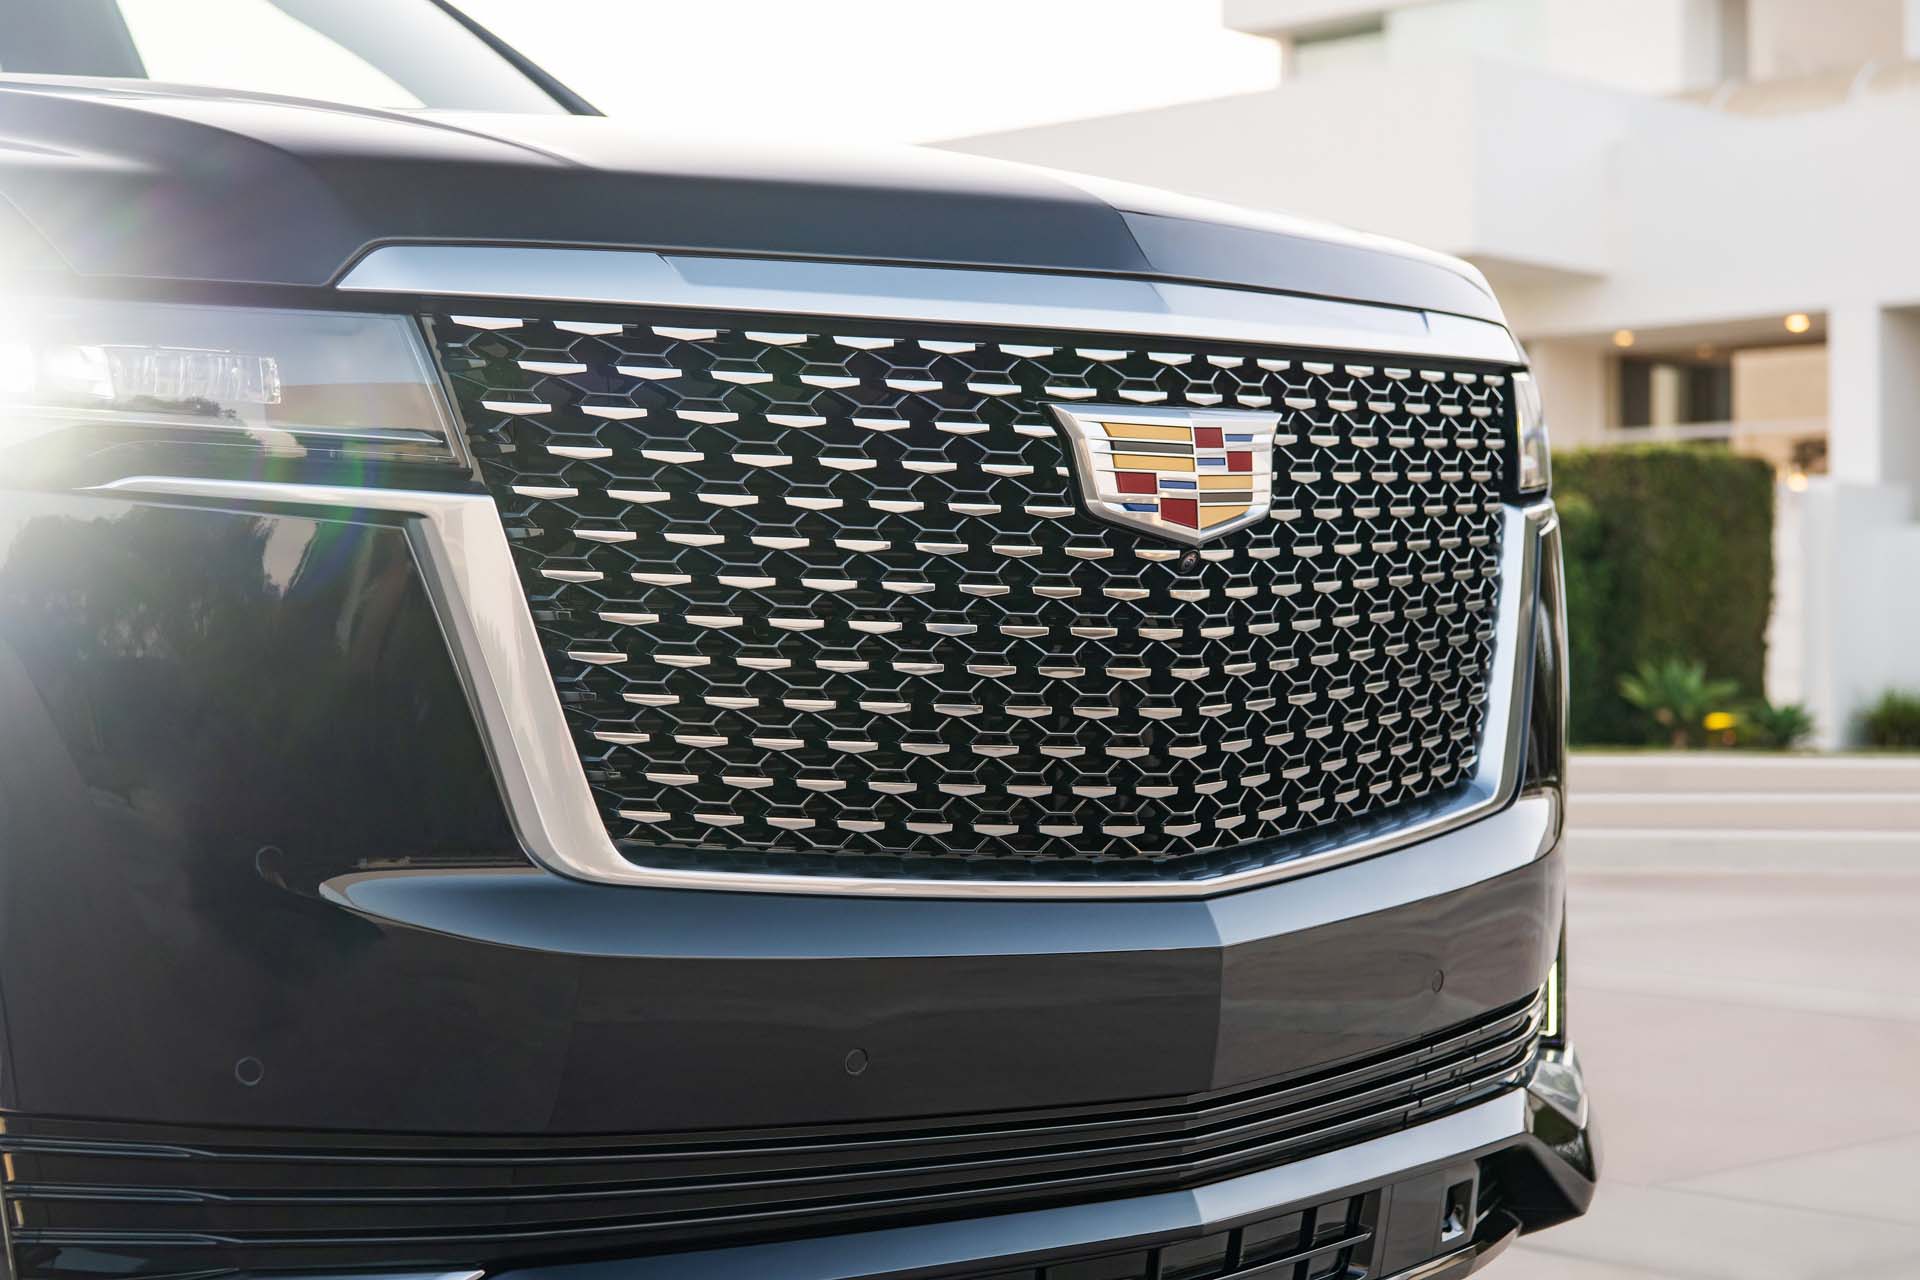 2021 Cadillac Escalade Grill Wallpapers #78 of 100